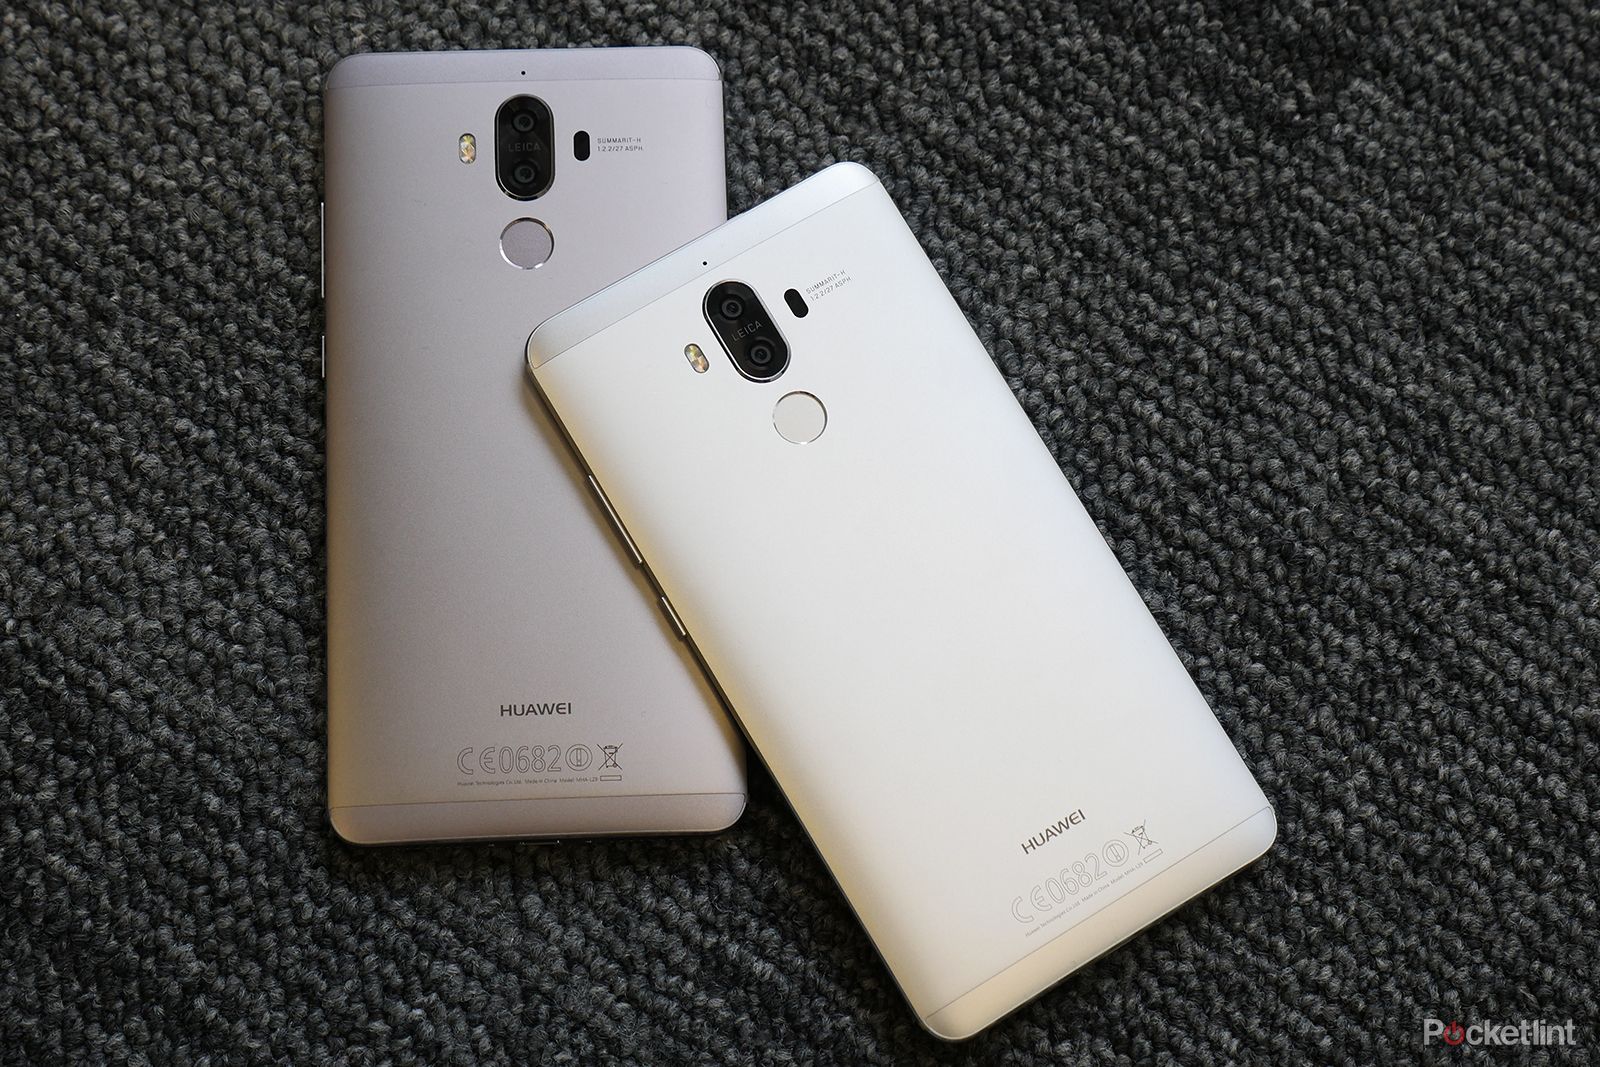 Huawei says the Mate 10 will be its most powerful device ever image 1